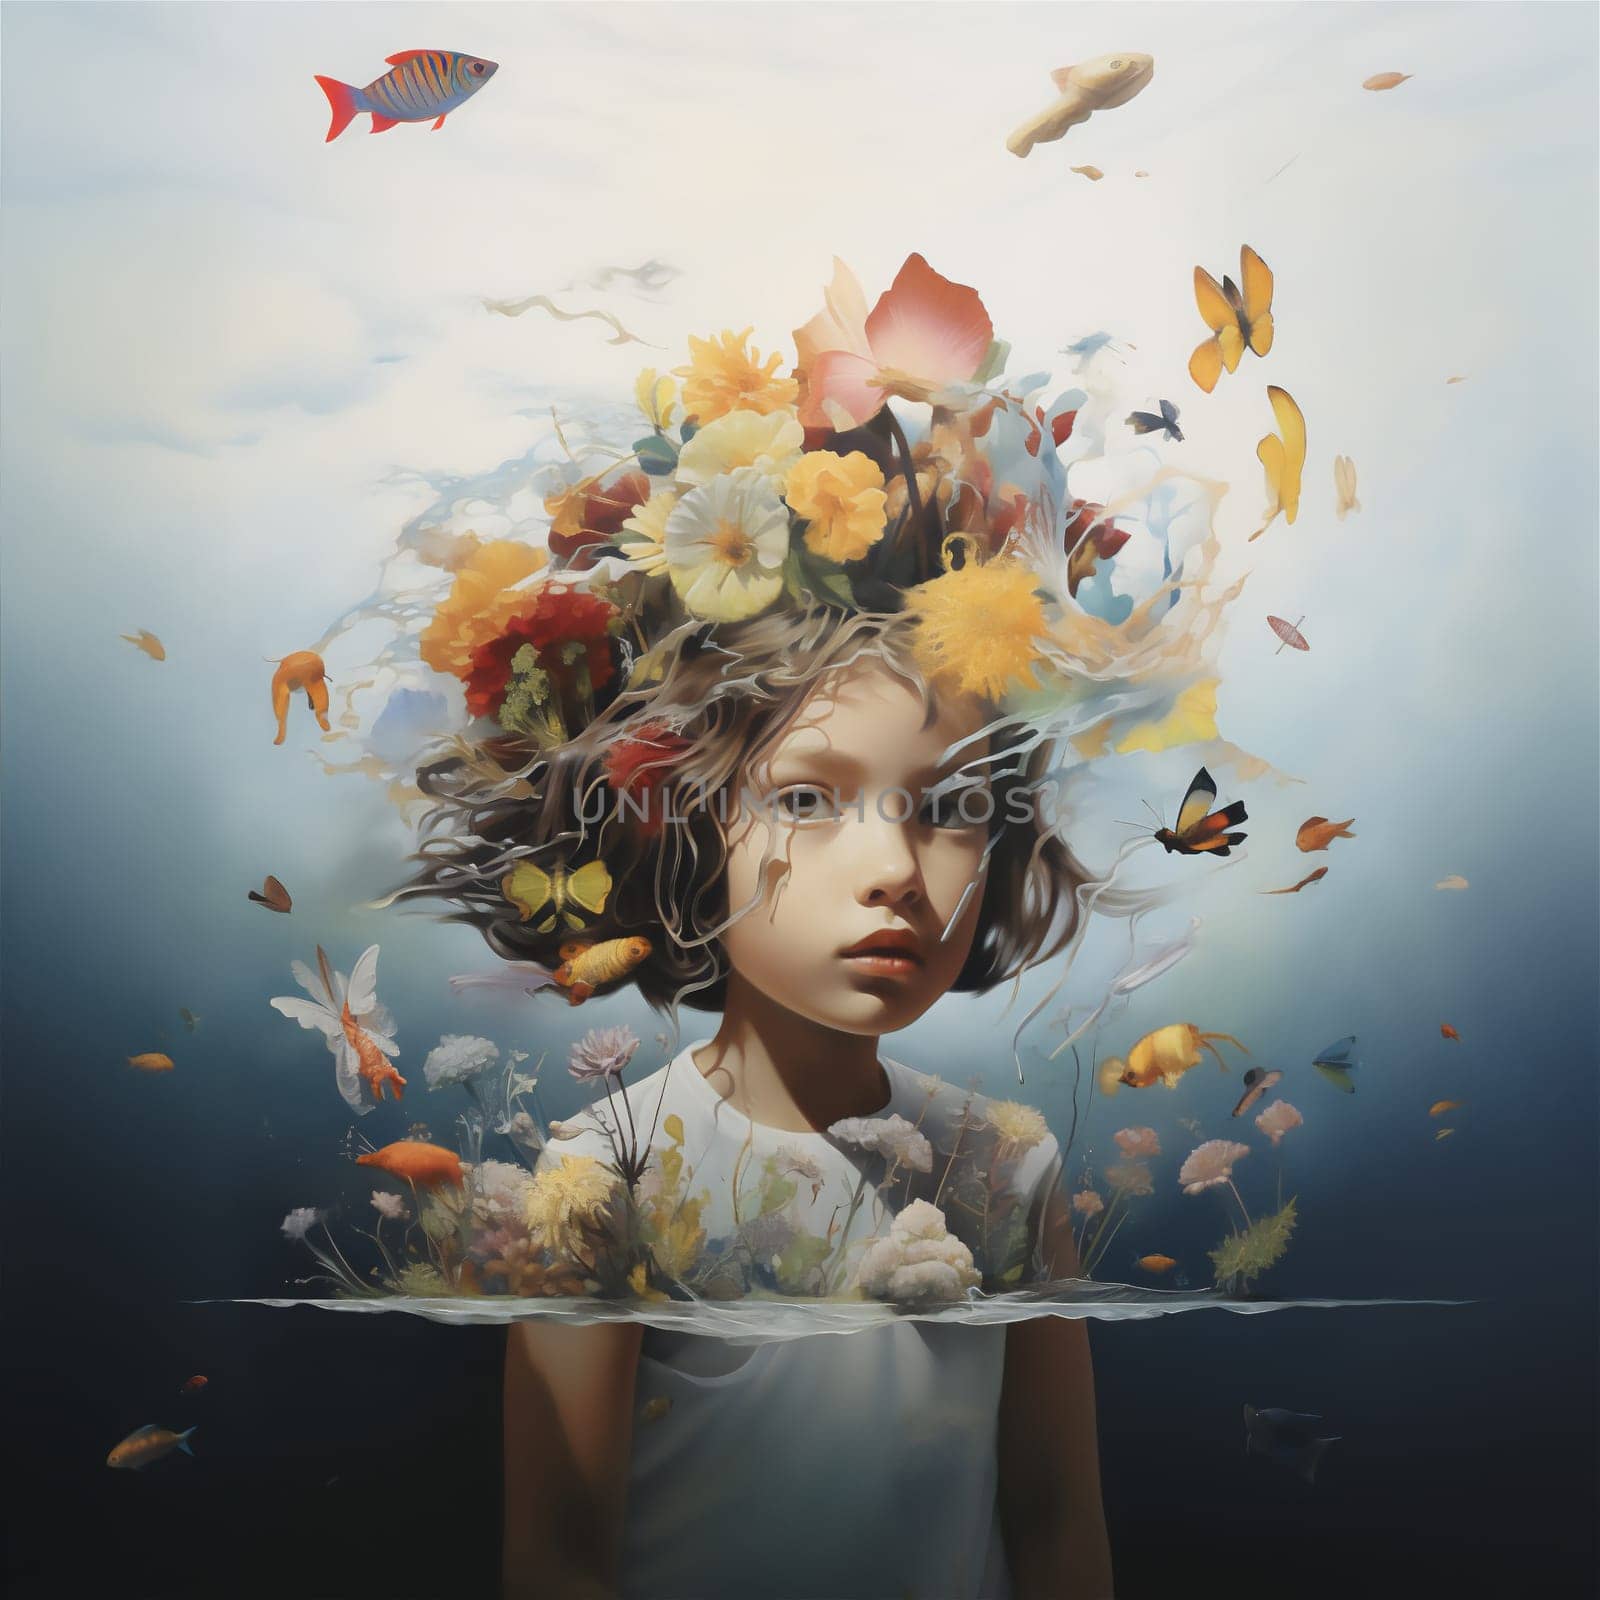 Surreal photo manipulation of girl head exploding into bouquet of flowers and butterflies. Creative and artistic expression of the beauty and fragility of life. Copy space